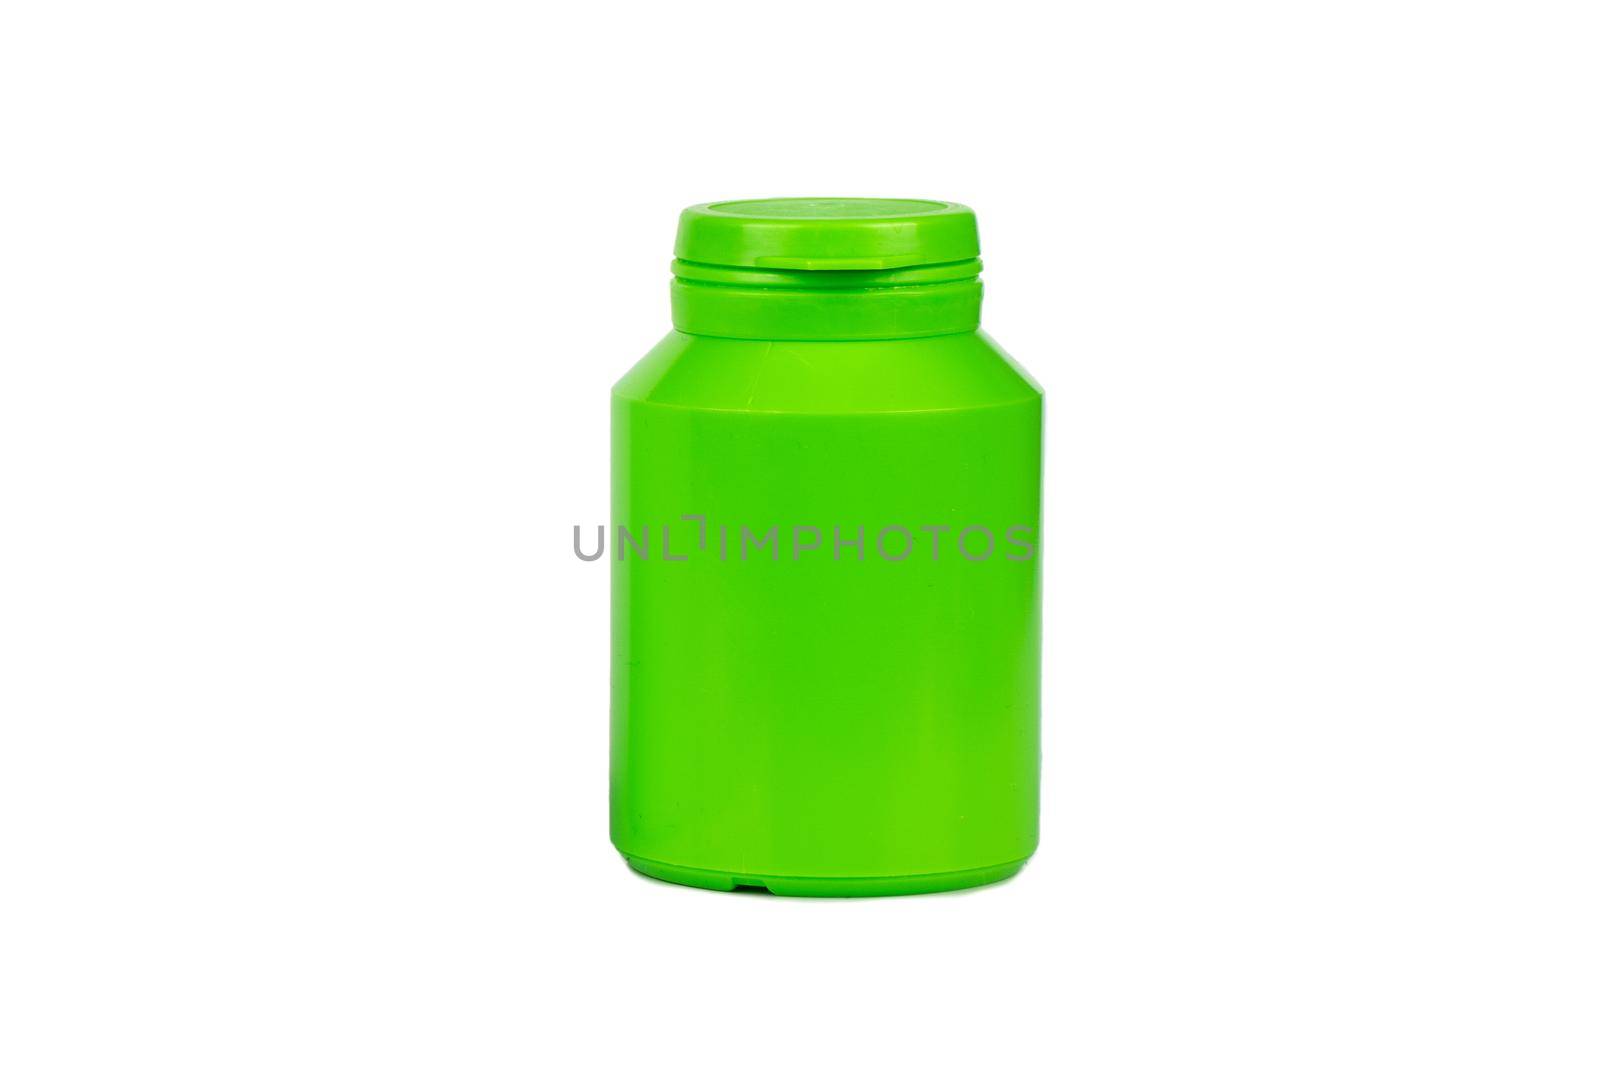 Green plastic jar for tablets and powder on white background